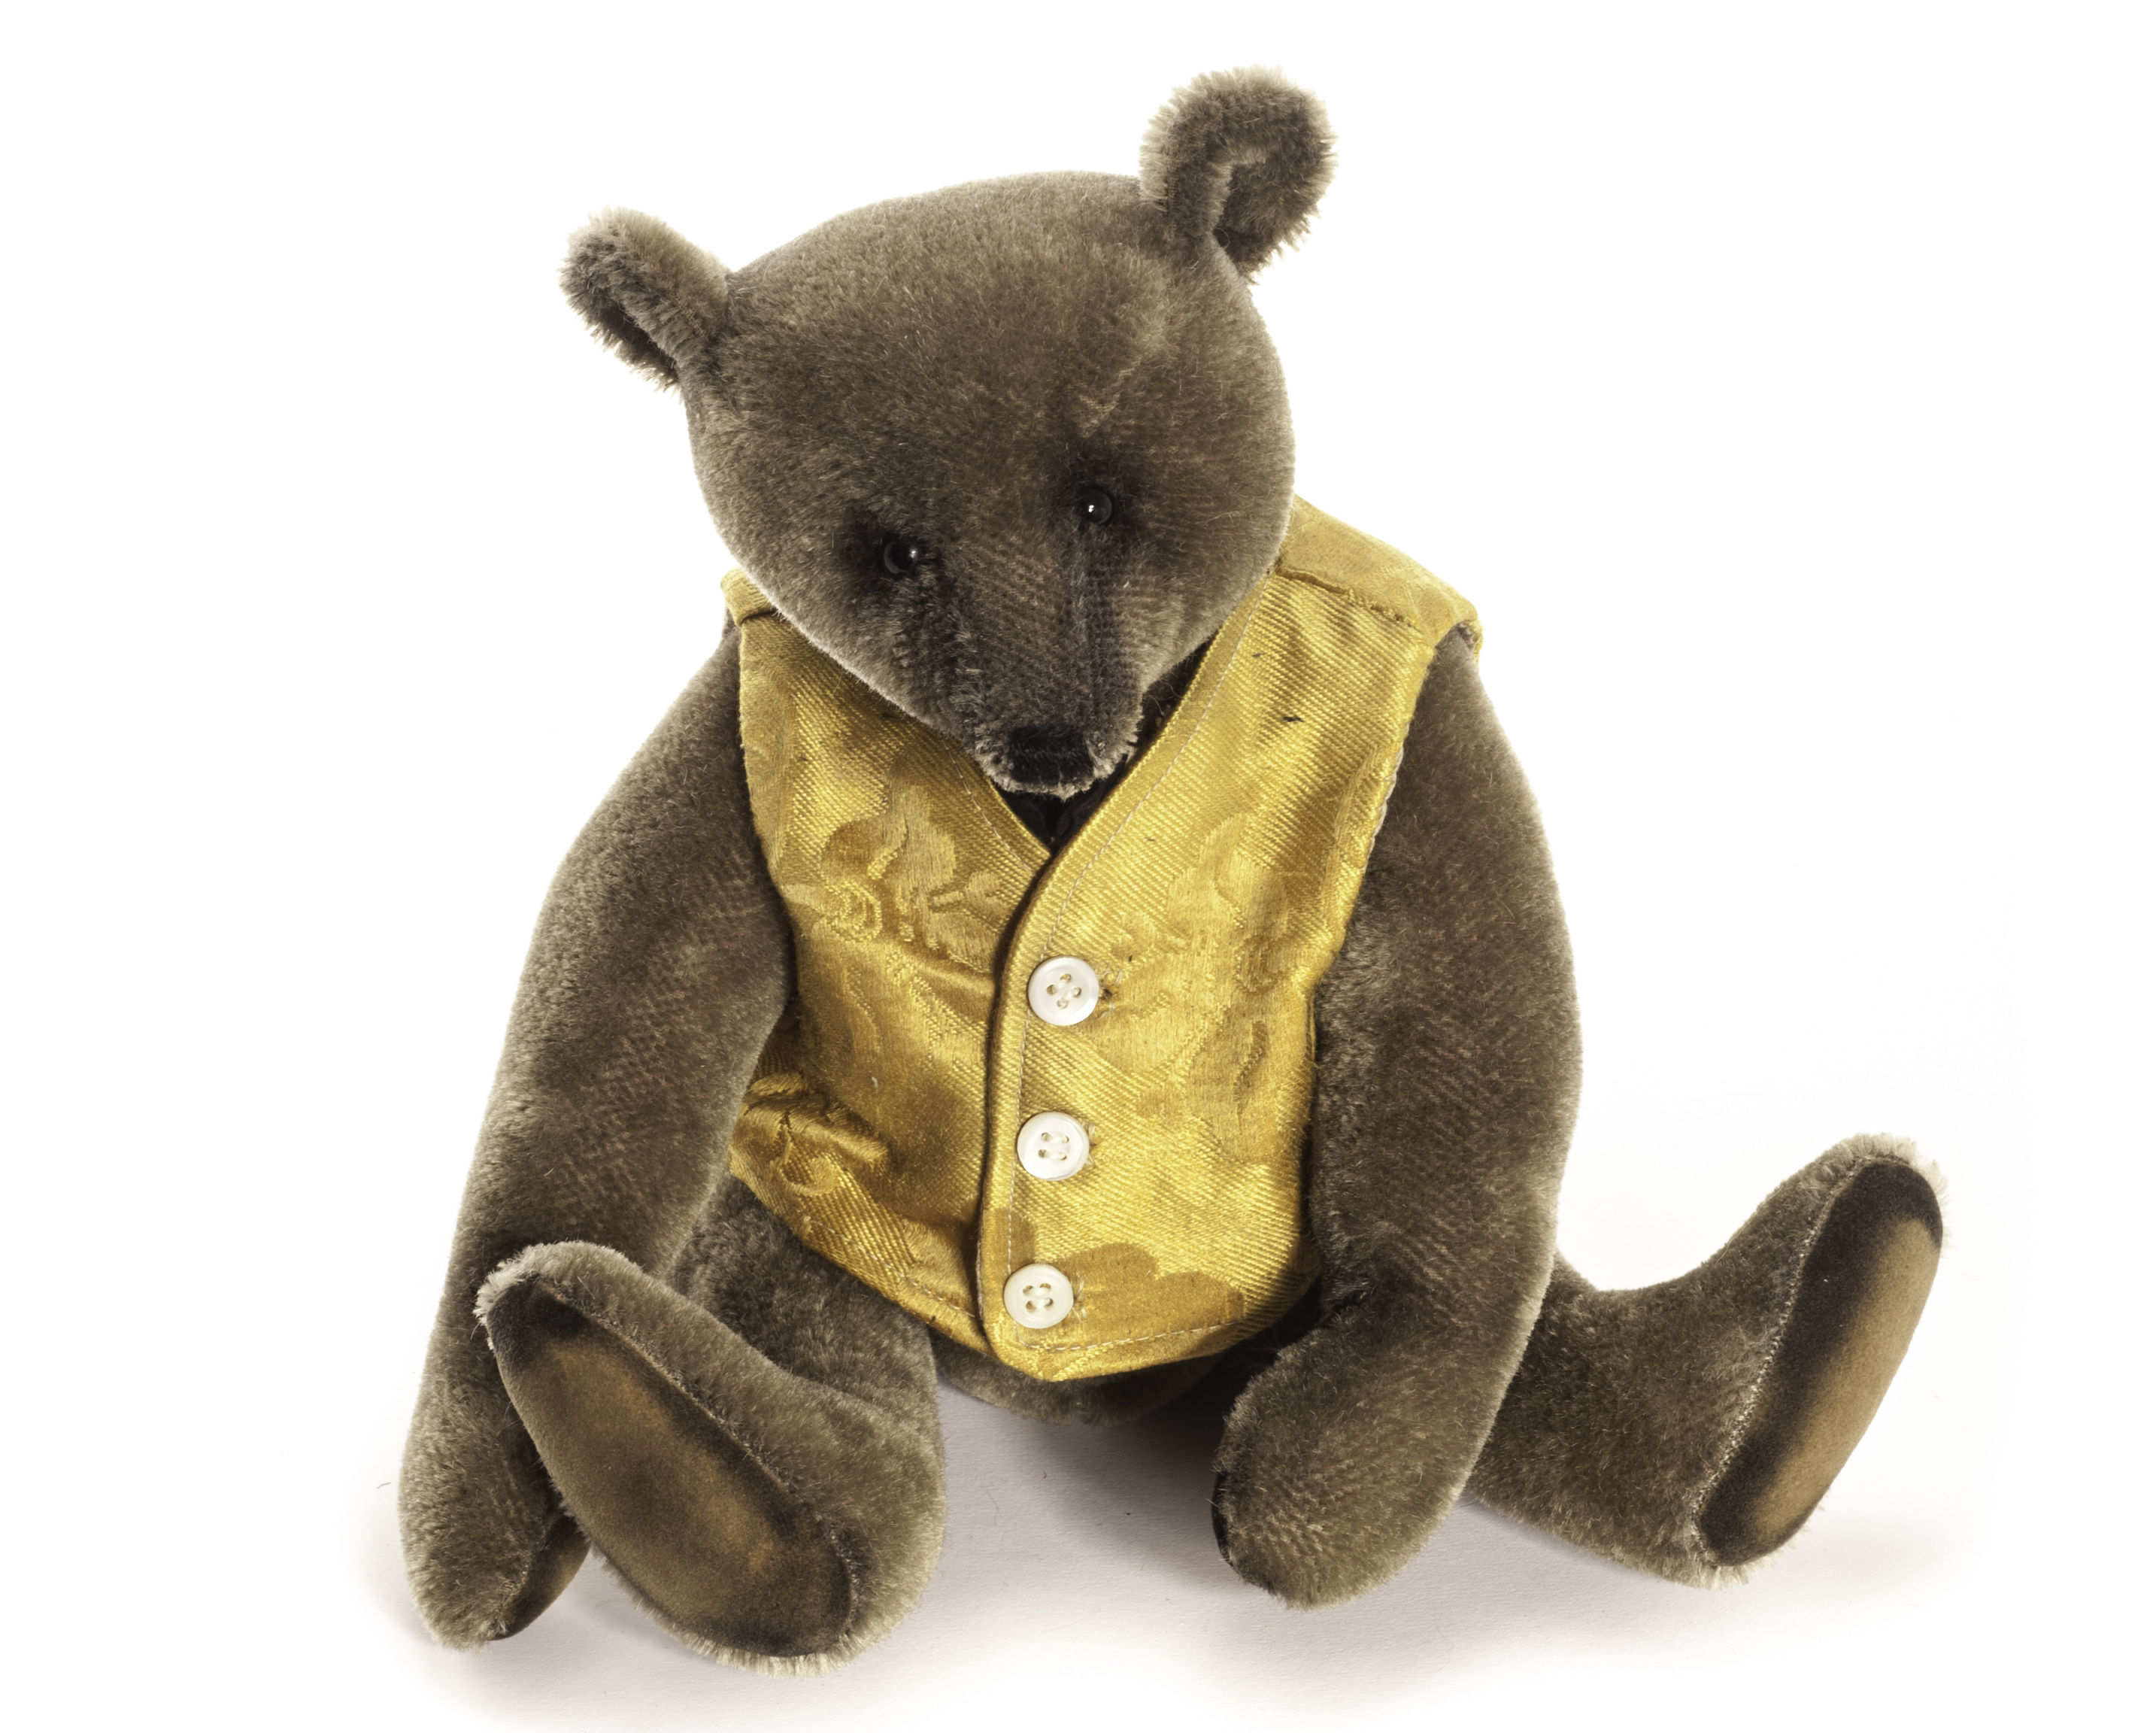 A Portabello Bears Teddy Bear by Amy Goodrich, a one of a kind artist bear with brown mohair and